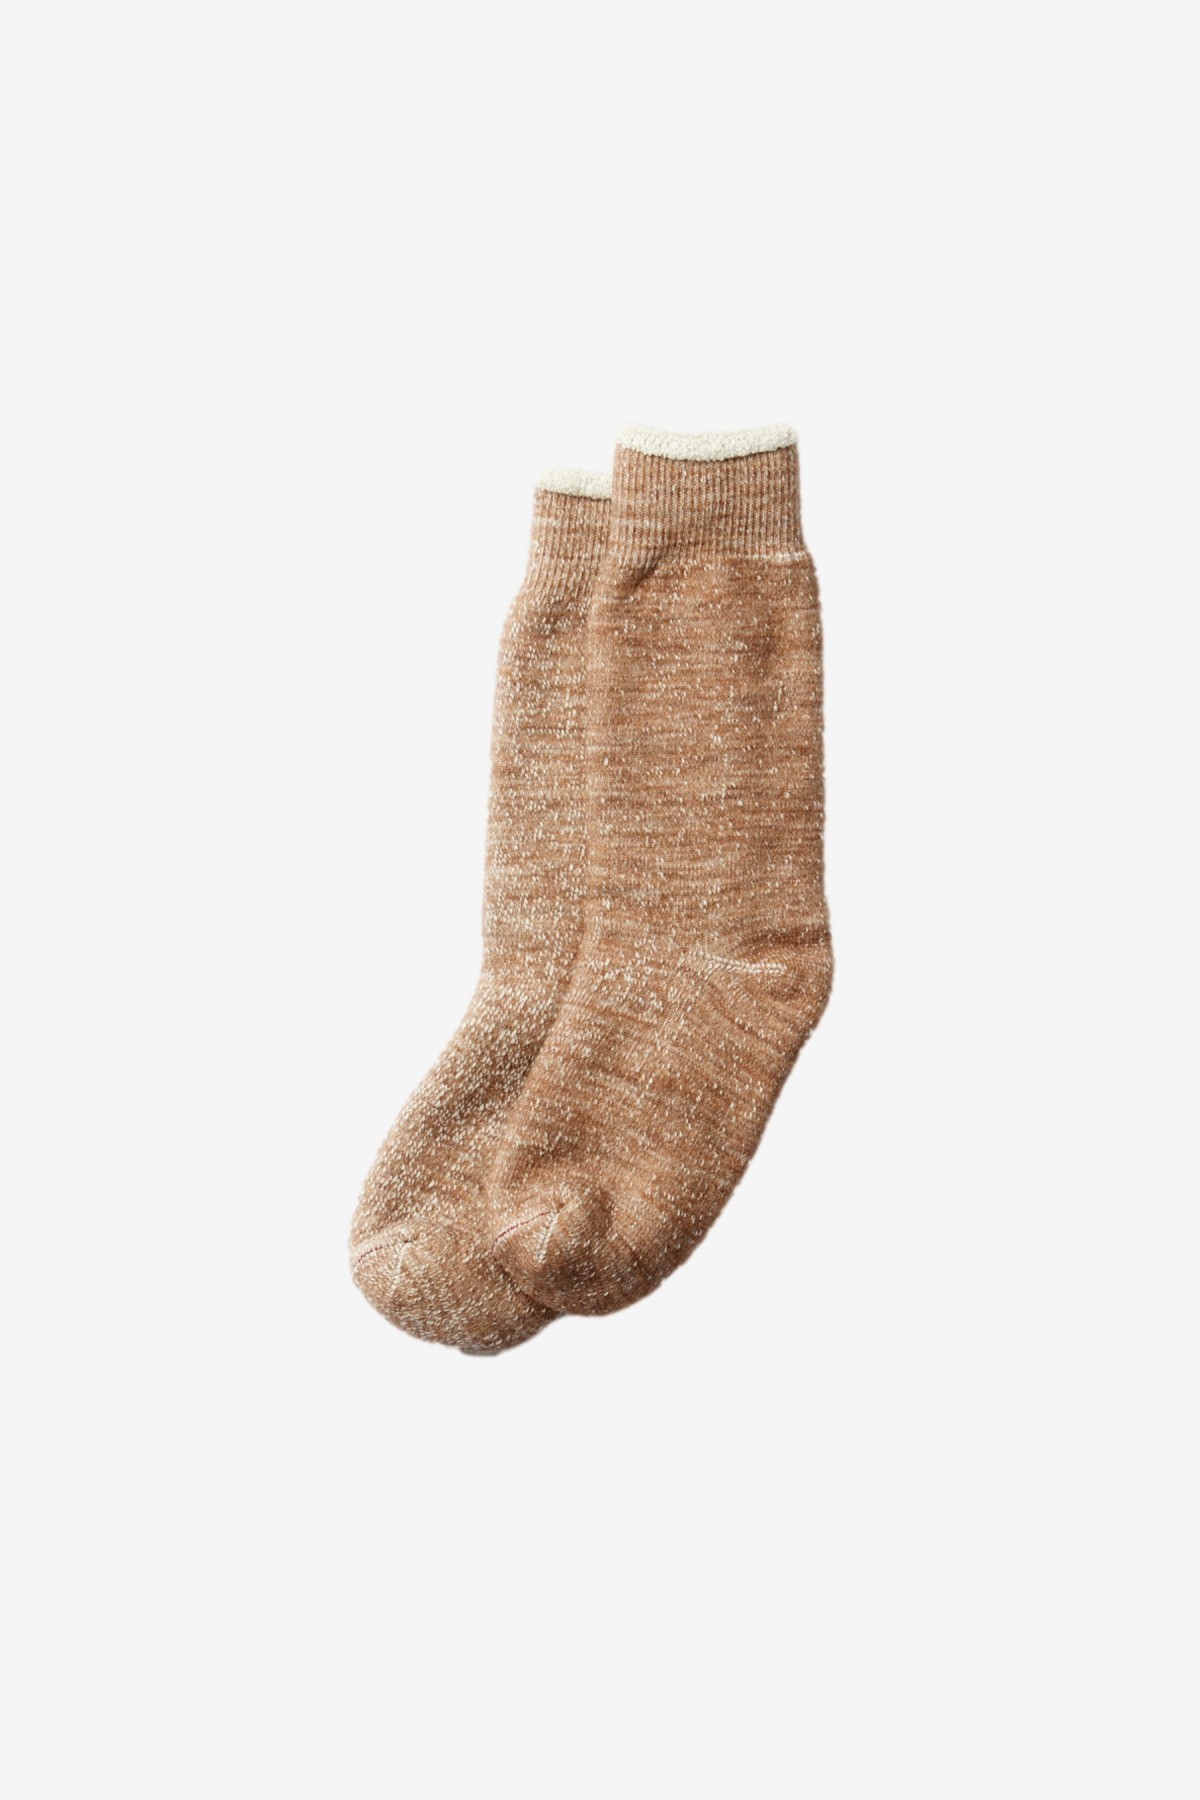 RoToTo Double Face Crew Socks in Camel